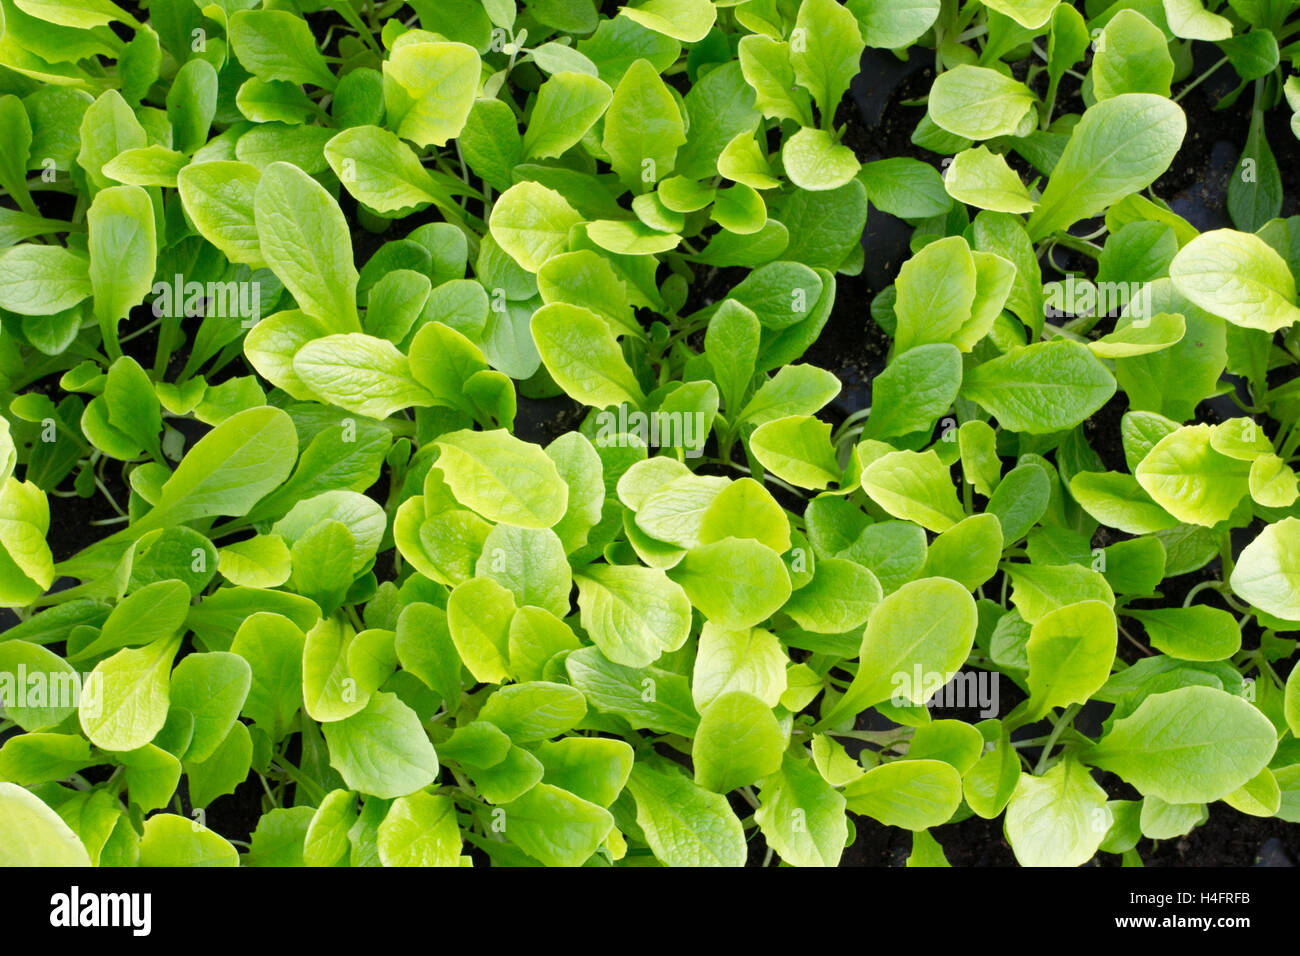 Baby leaves growing in a tray on a farm, farm inspired Stock Photo